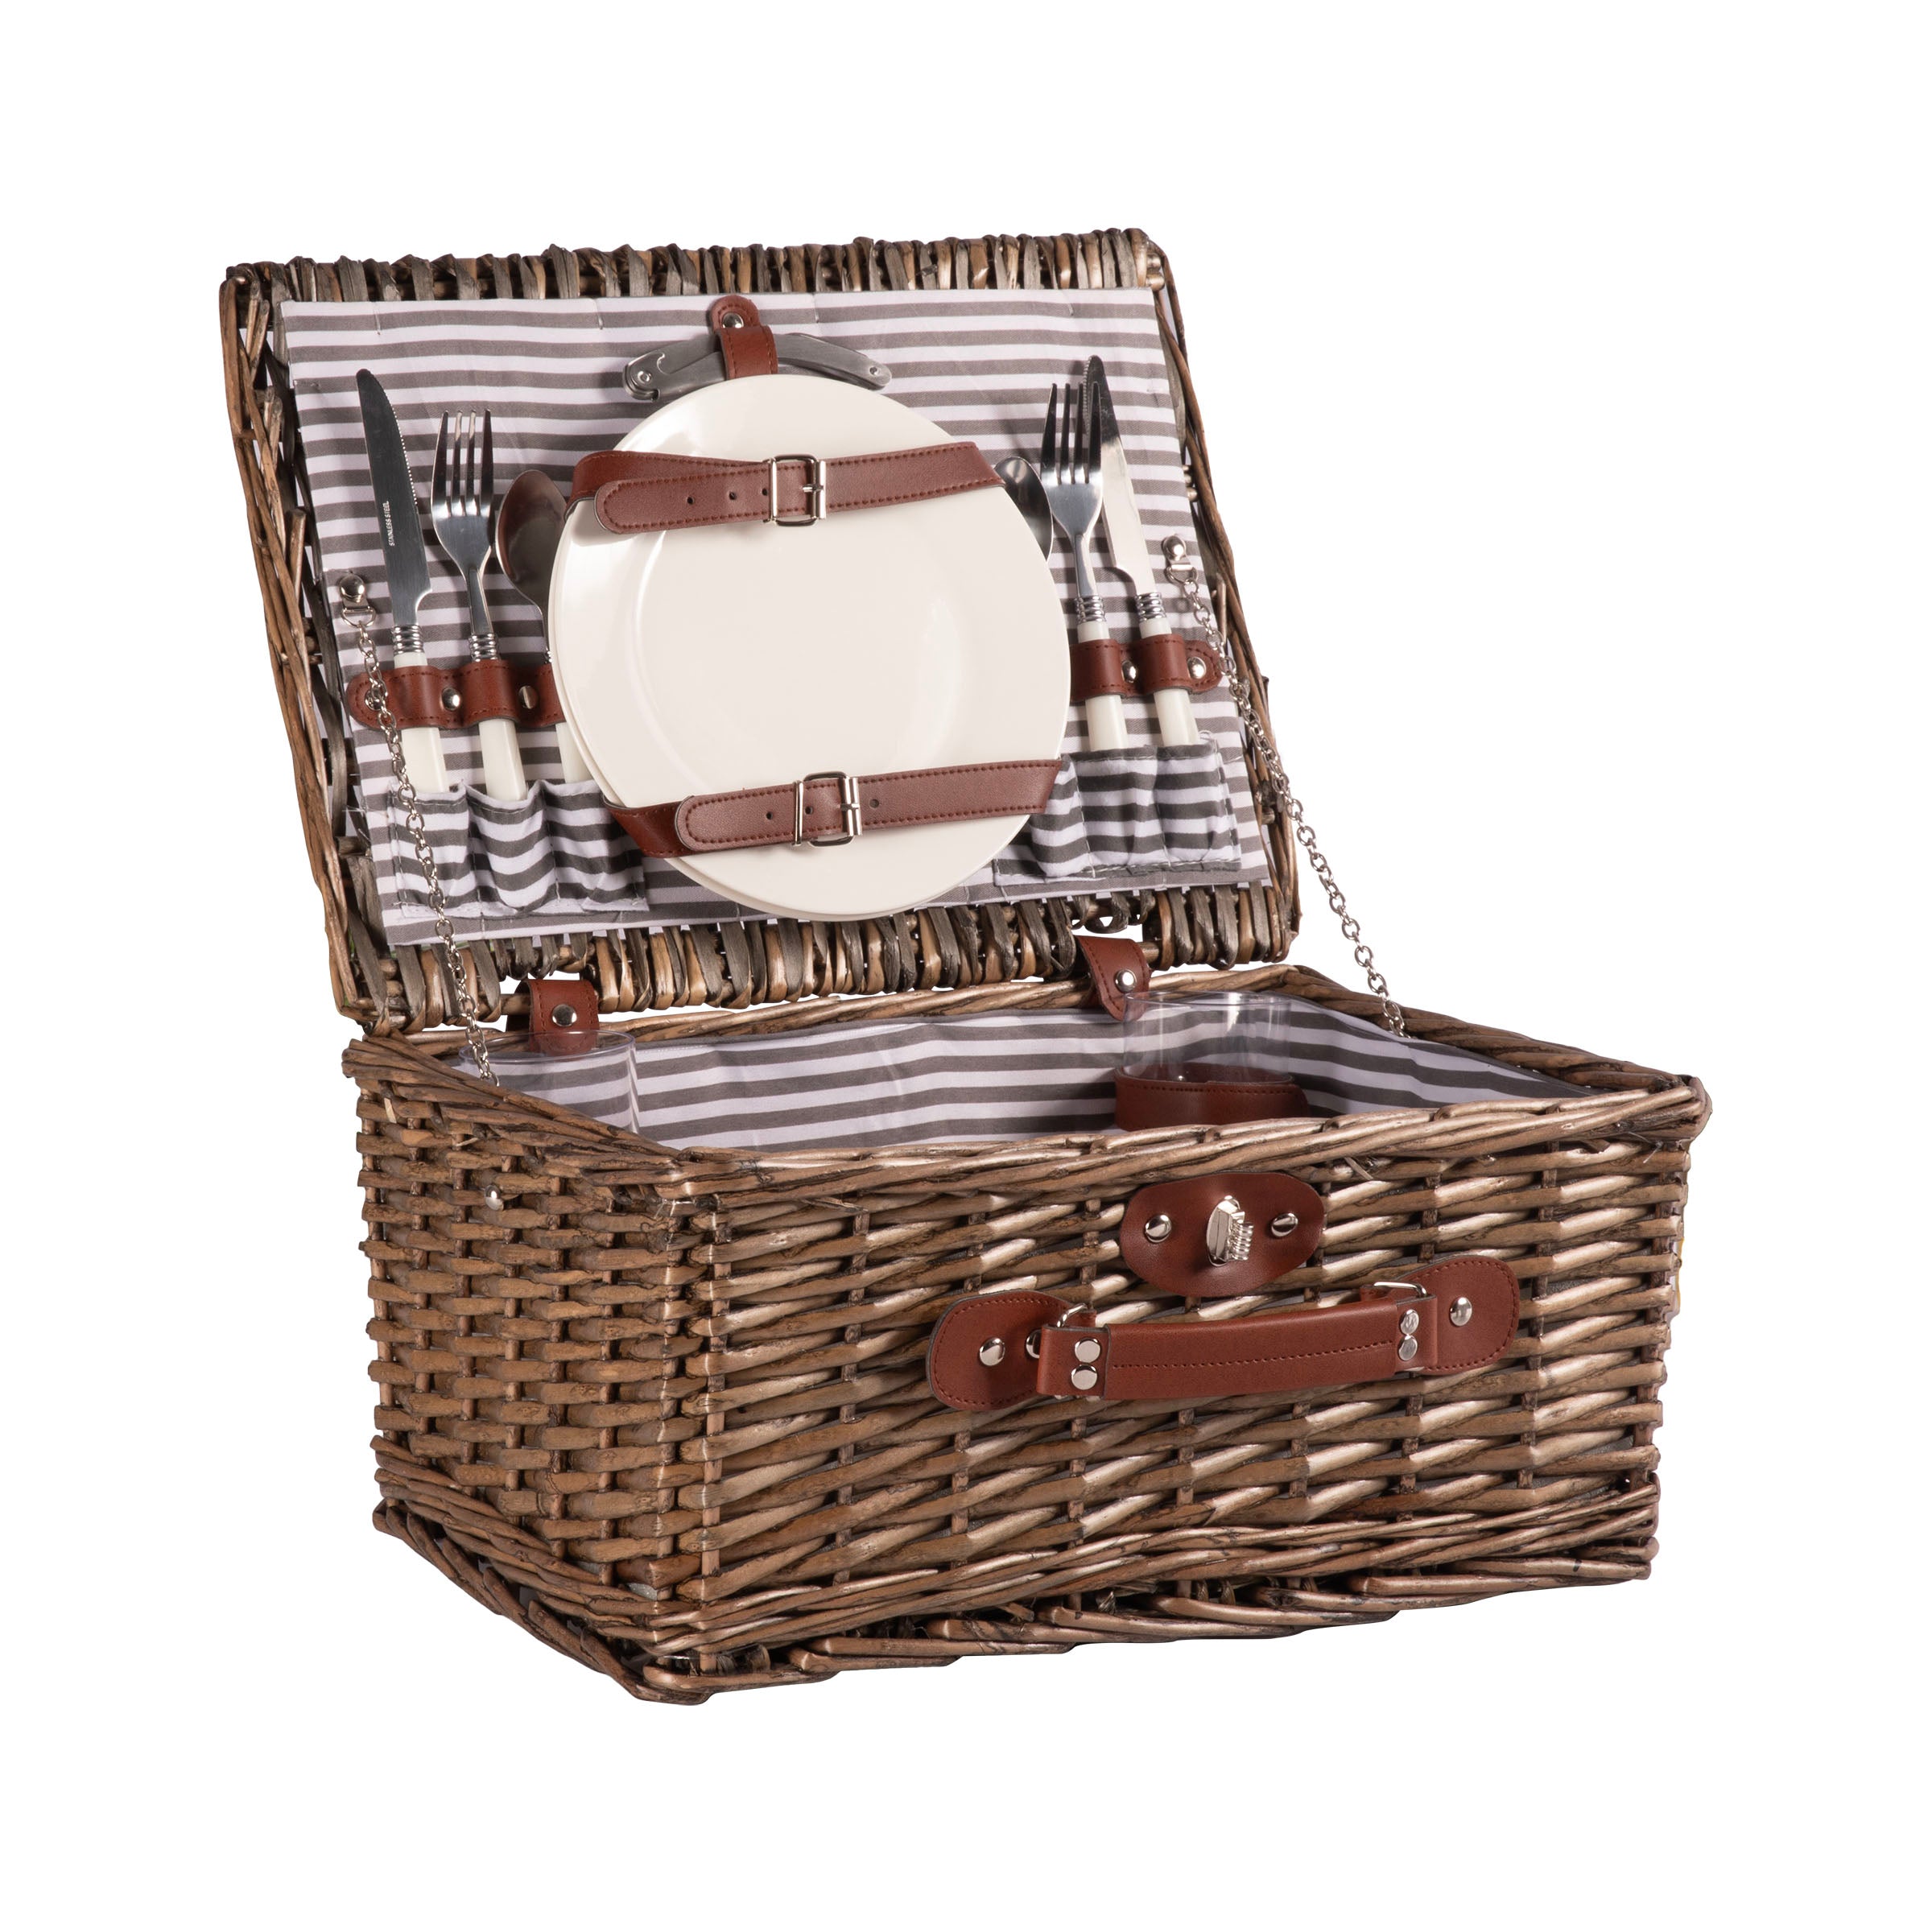 Providence Picnic Basket for 2, (Taupe Willow with Grey & White Striped Lining)